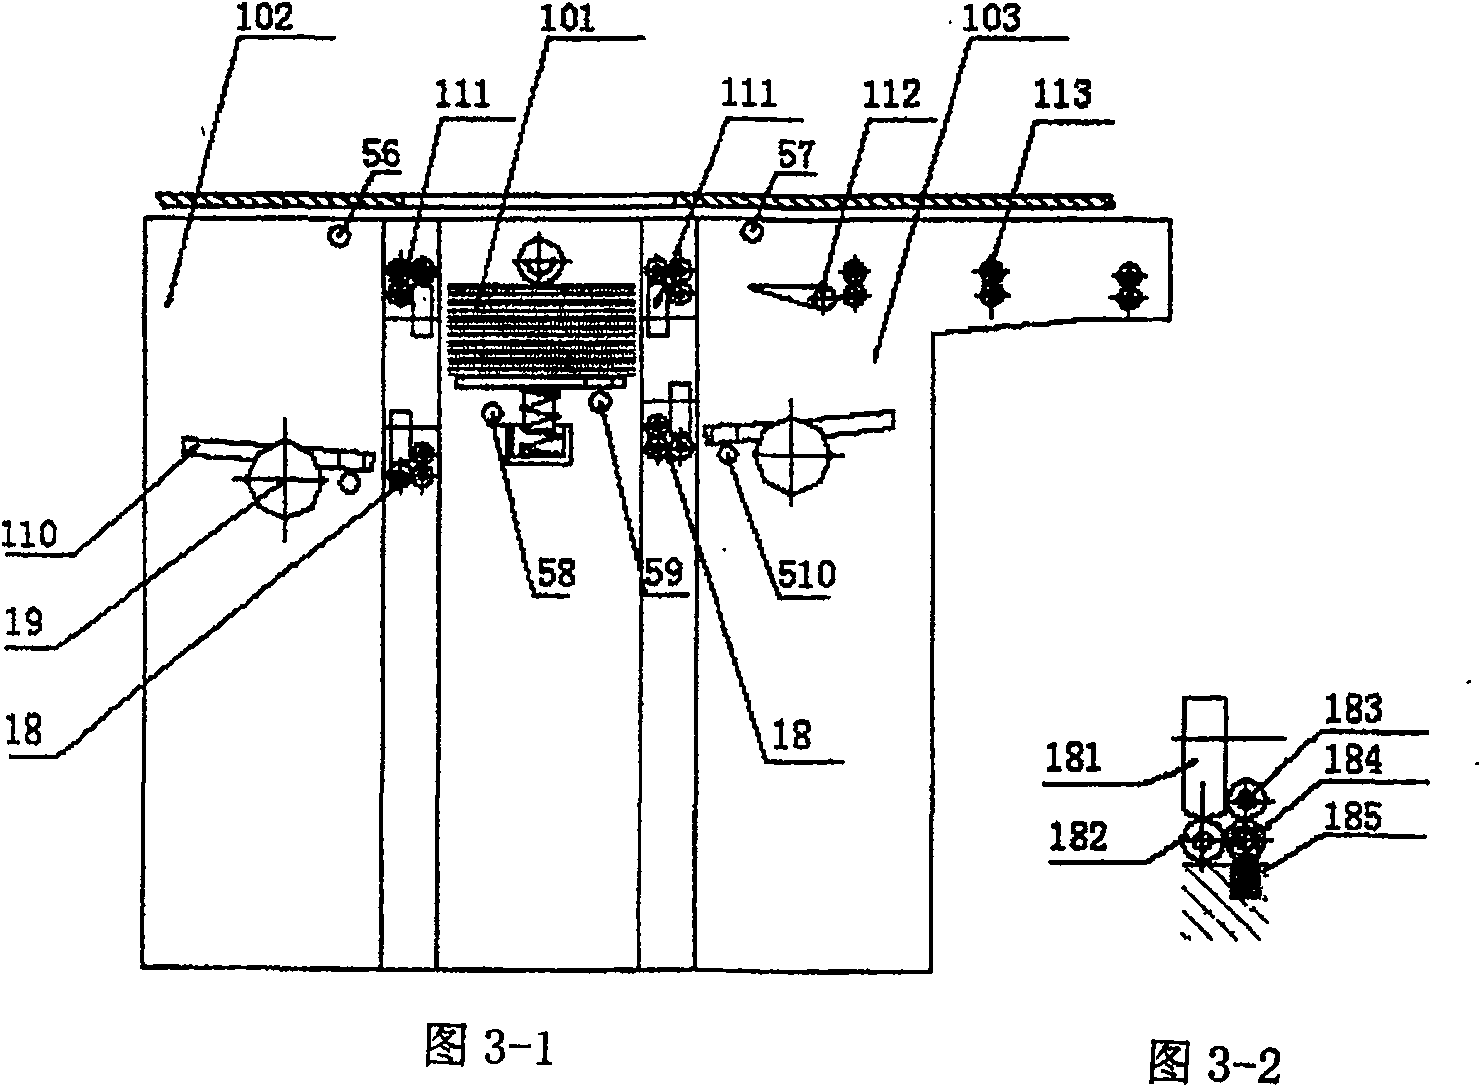 Multifunctional electromechanical device for riffling and dealing playing cards automatically